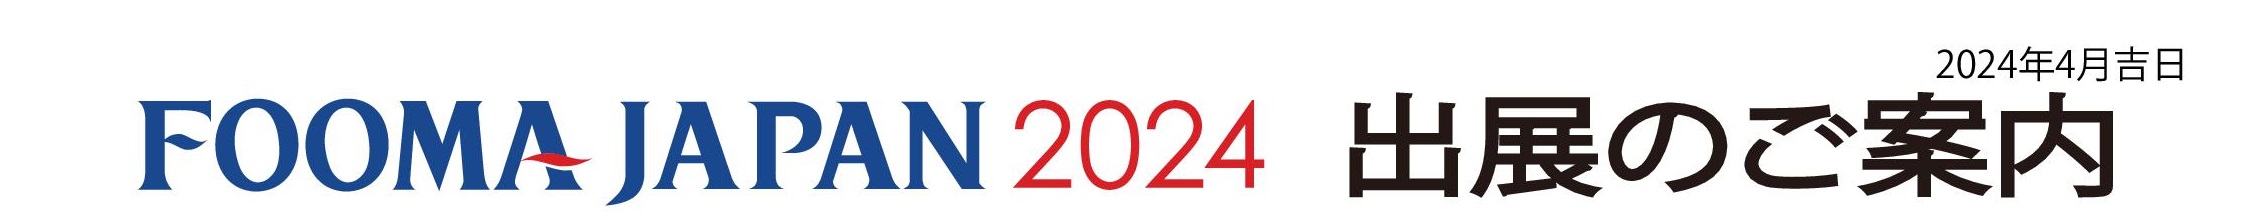 fooma2024 出展のご案内